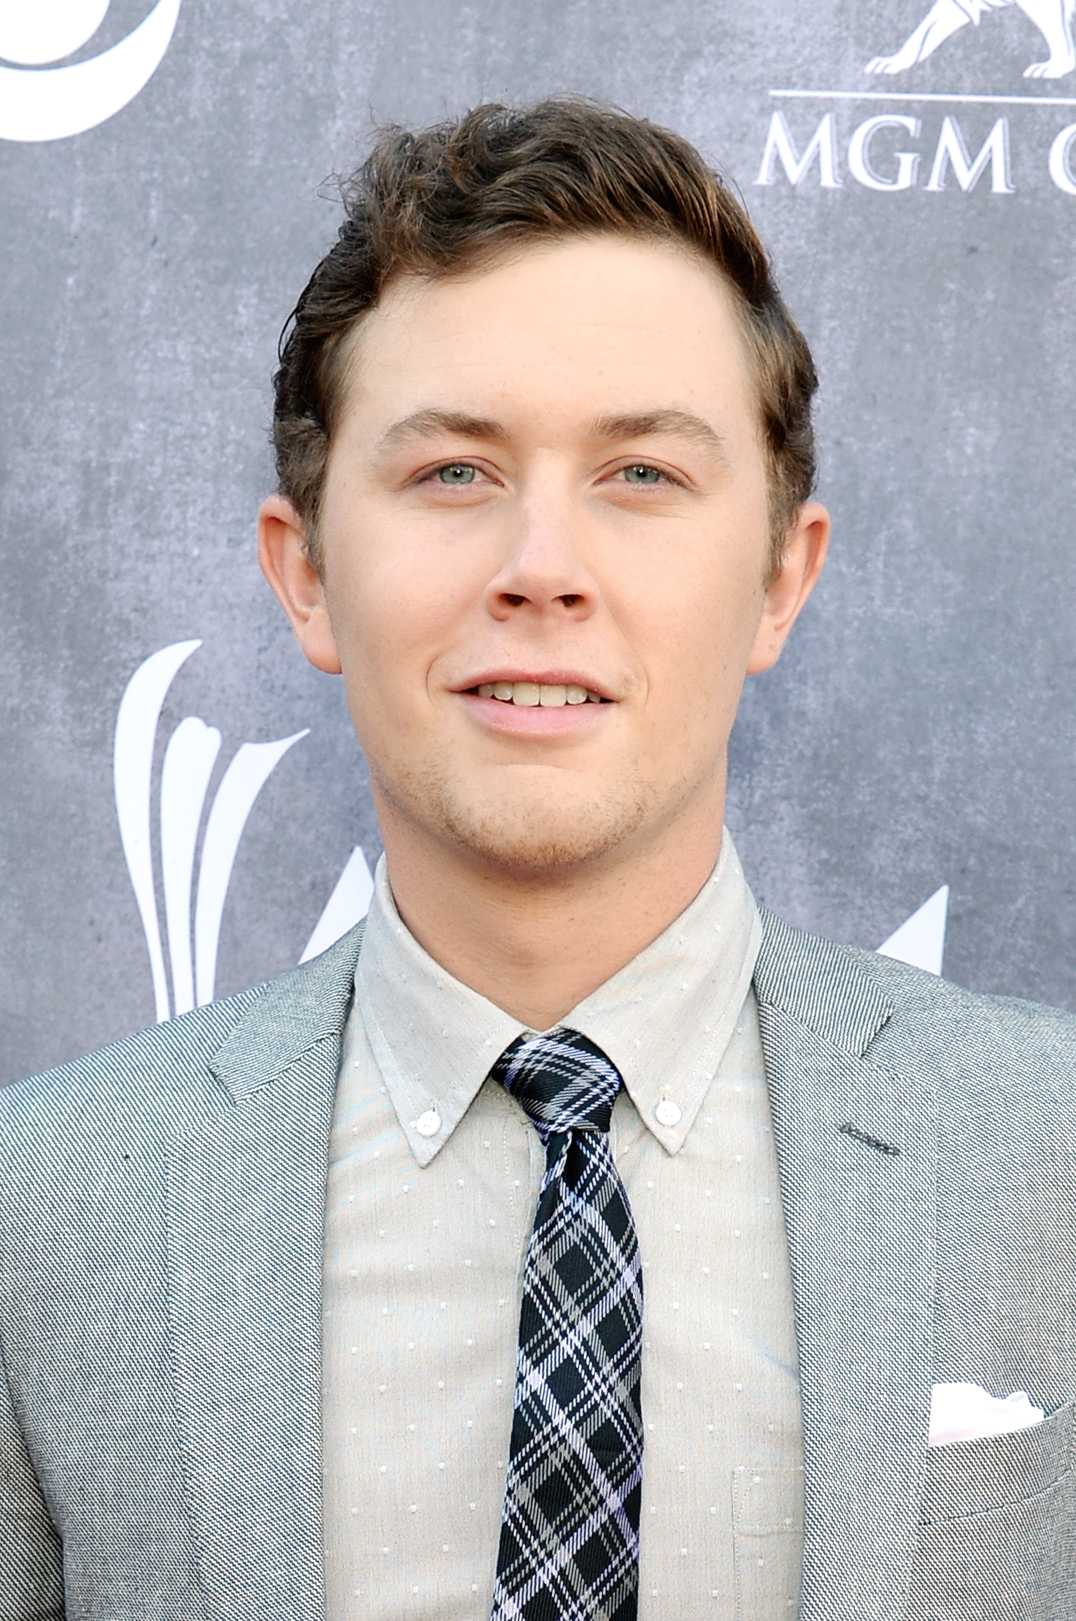 Scotty McCreery attends the 49th Annual Academy of Country Music Awards at the MGM Grand Garden Arena on April 6, 2014 in Las Vegas. (Rick Diamond—Getty Images for ACM)